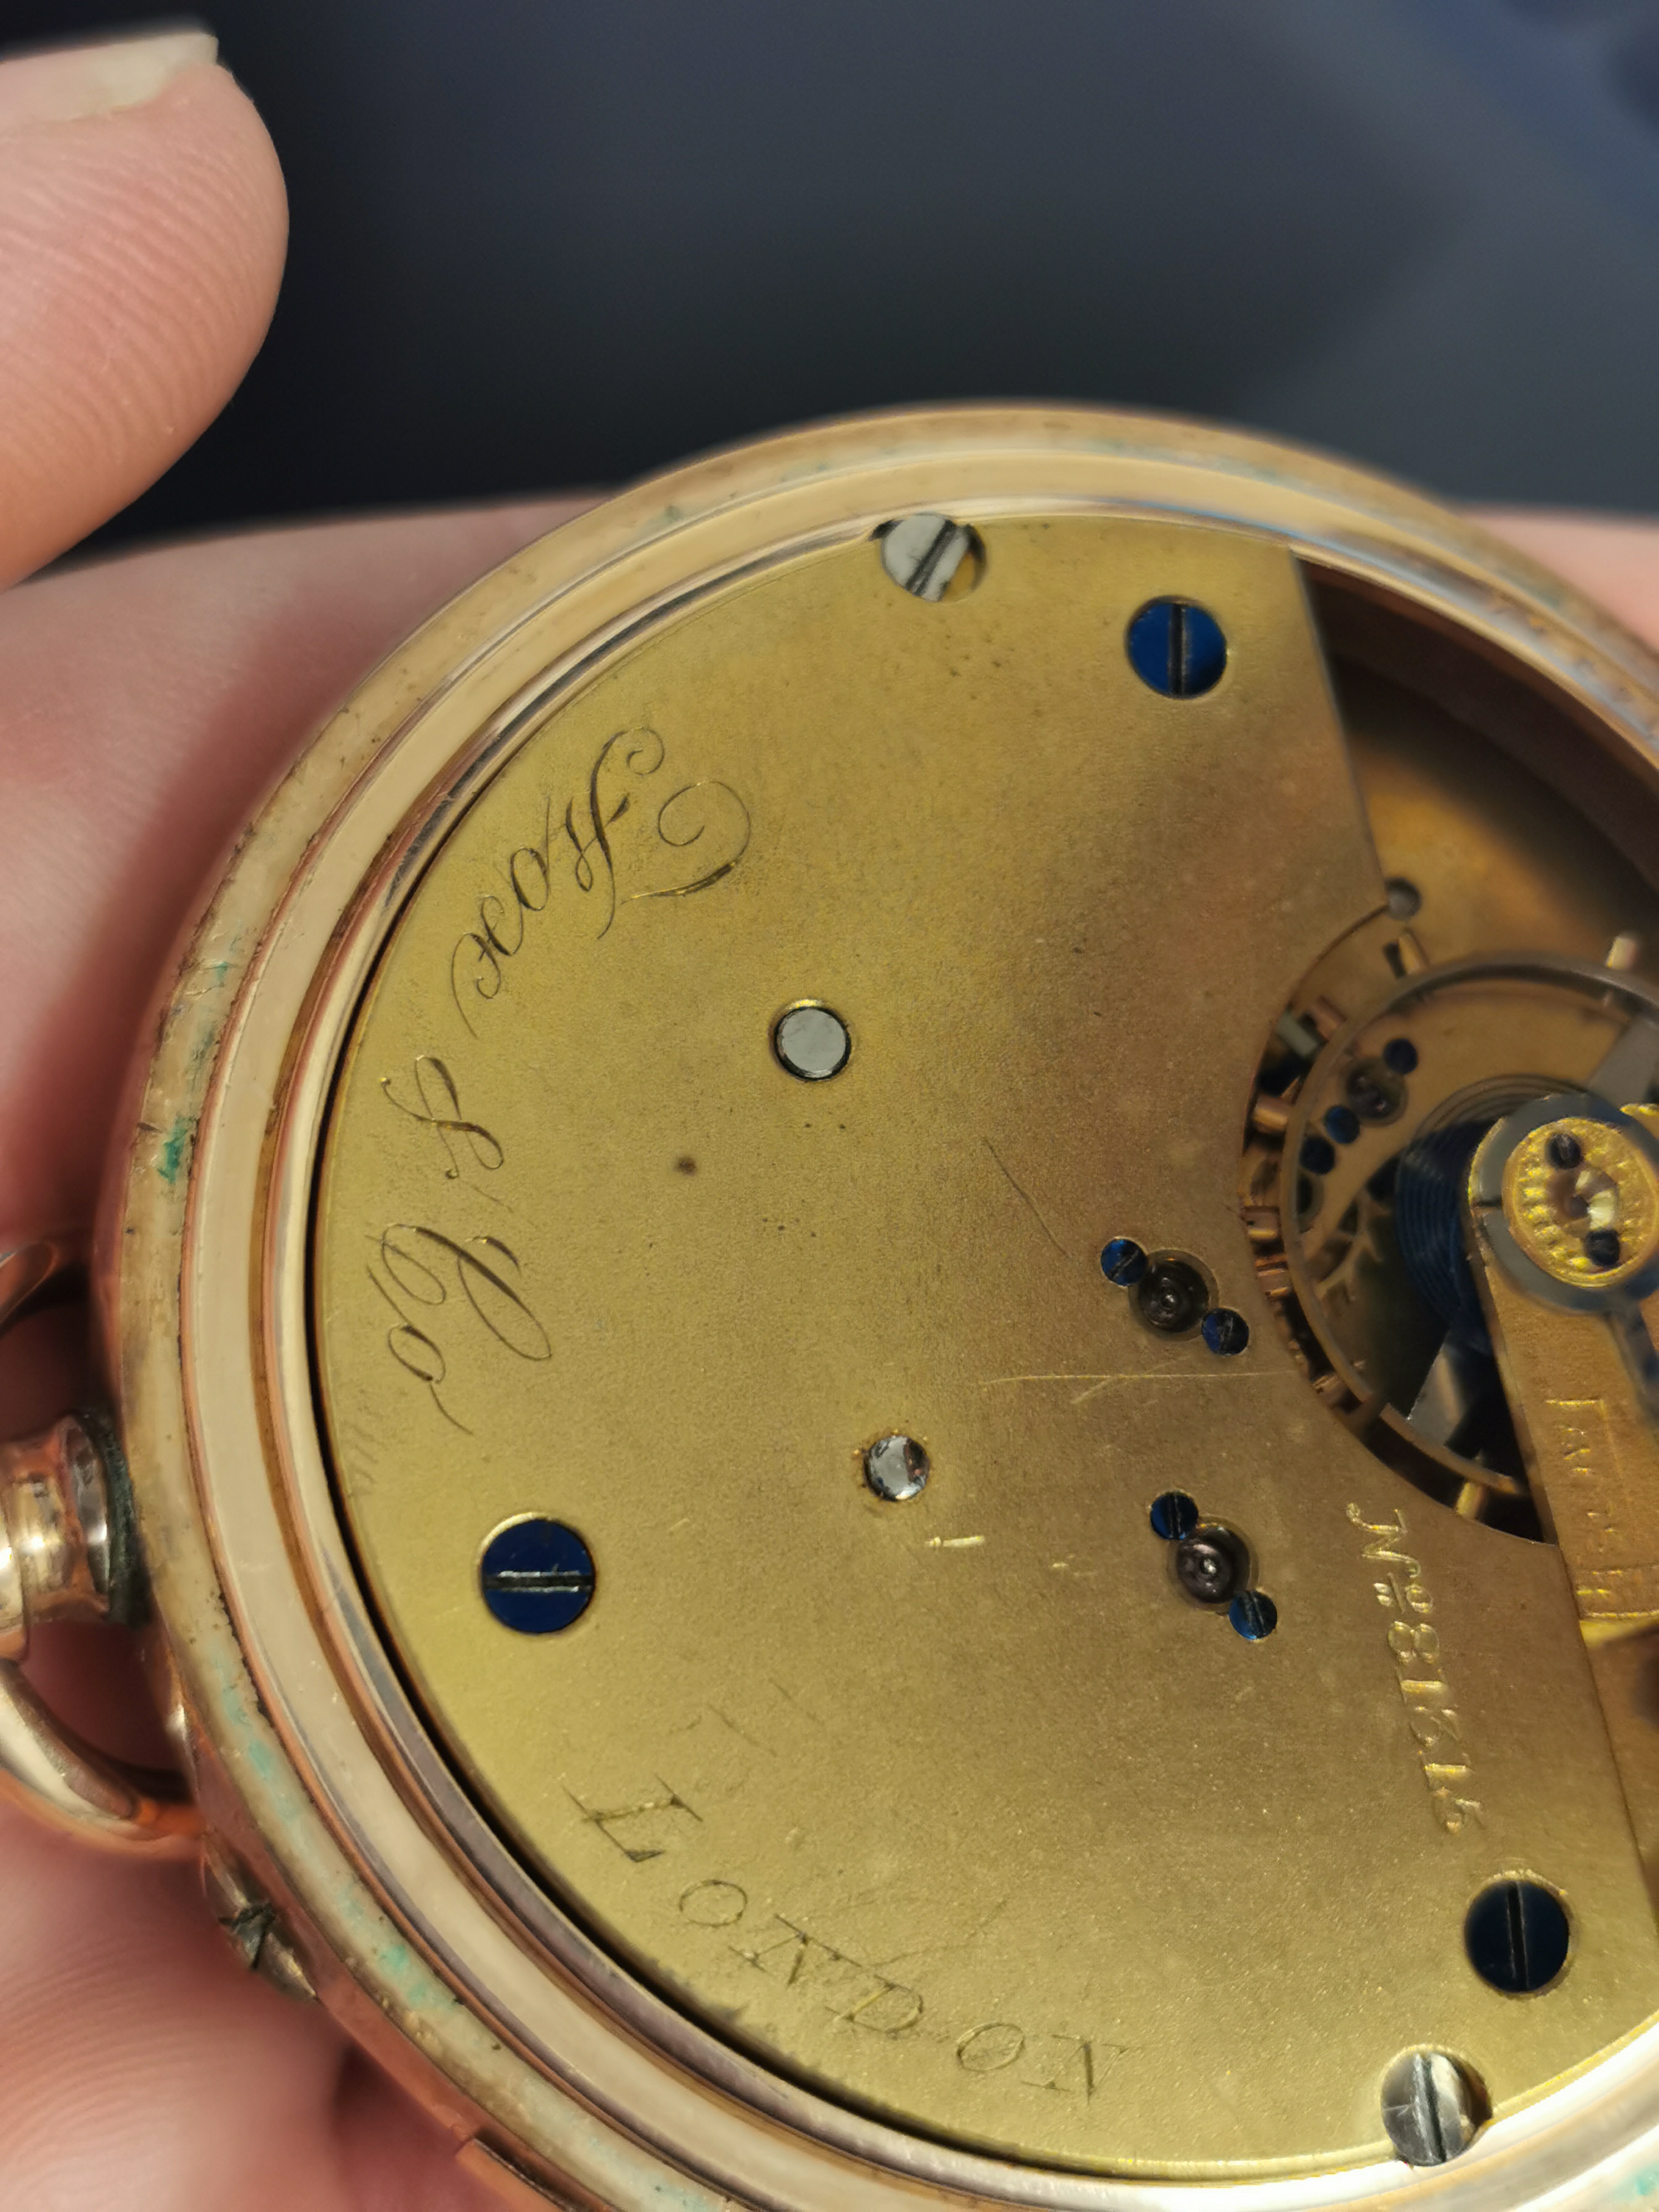 London-Made Gents Gold pocket watch (not working) - marked "Two Plates of 14ct Gold" to case - Image 5 of 6